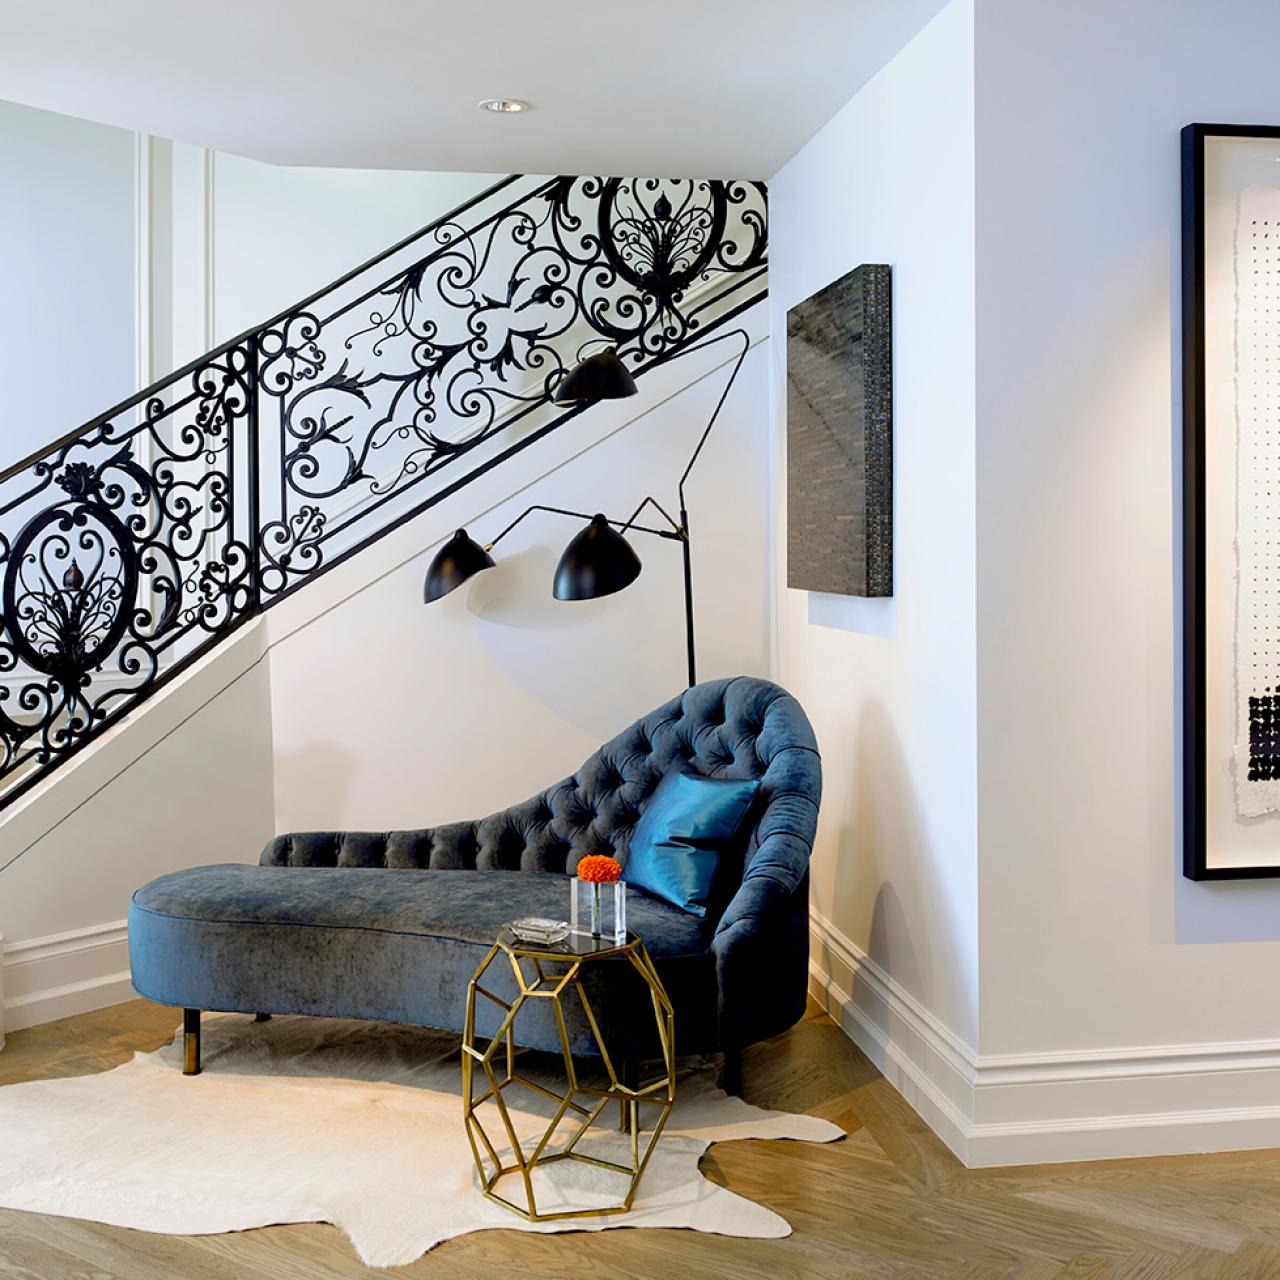 28 Striking Staircase Ideas to Makeover Any Space (Big or Small)